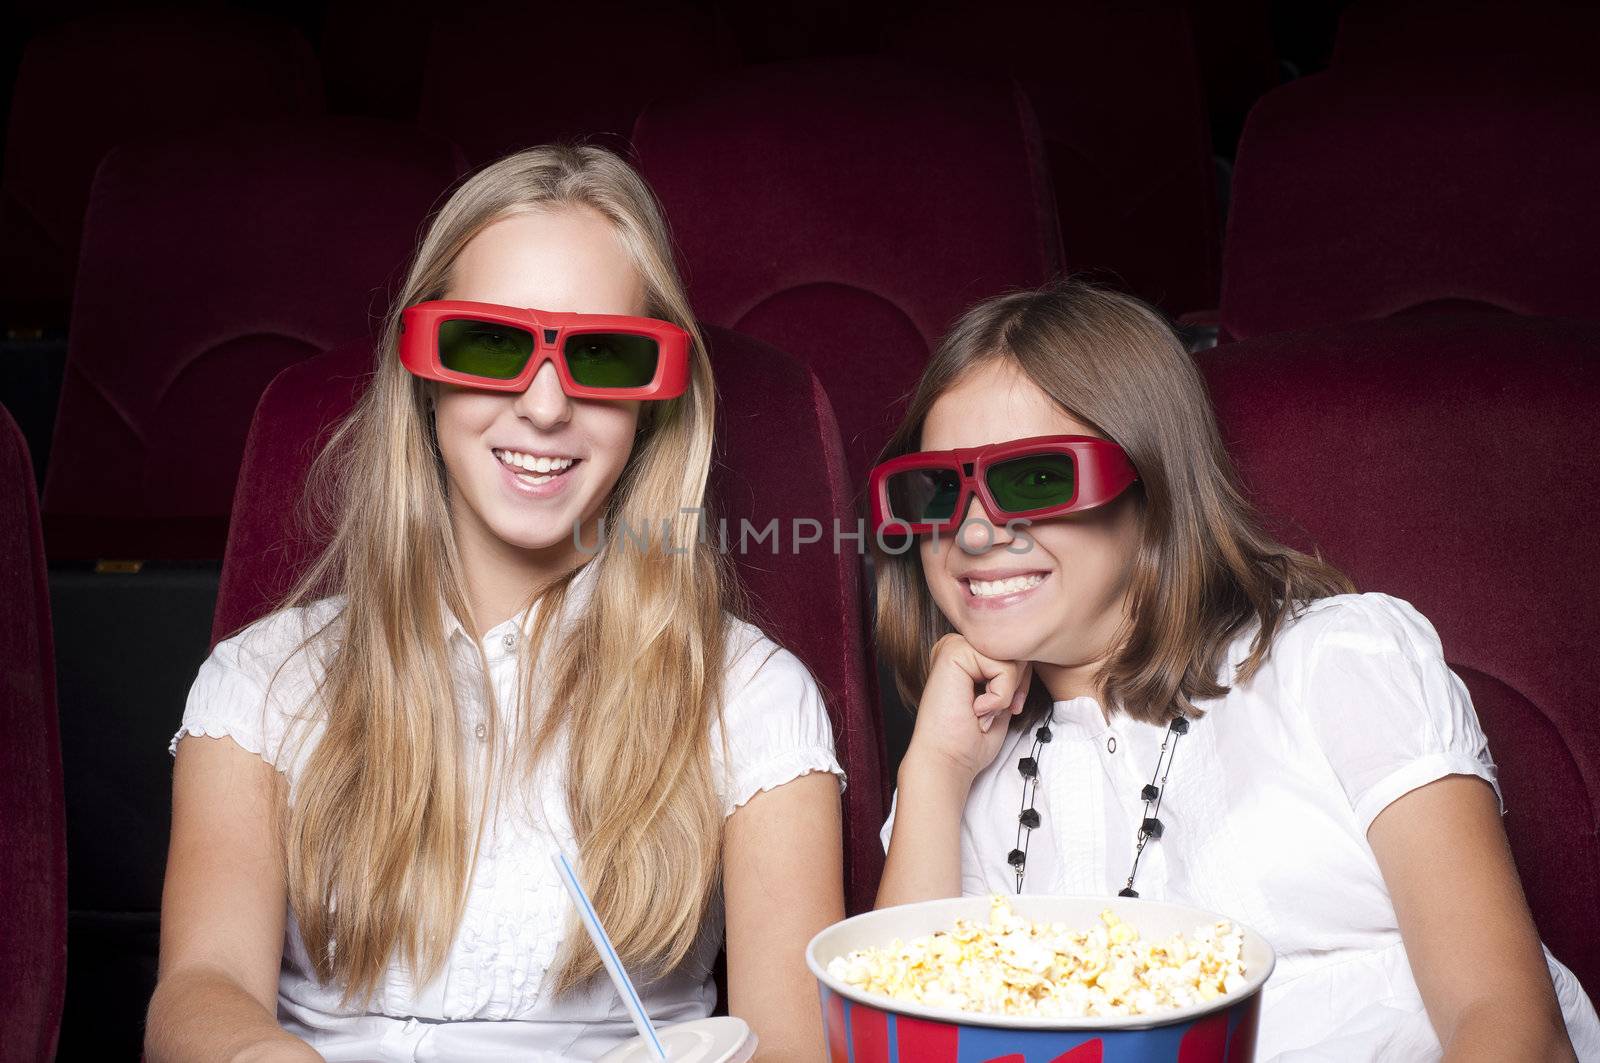 two girls look three-dimensional cinema, sitting in the glasses, eat popcorn, drink drink